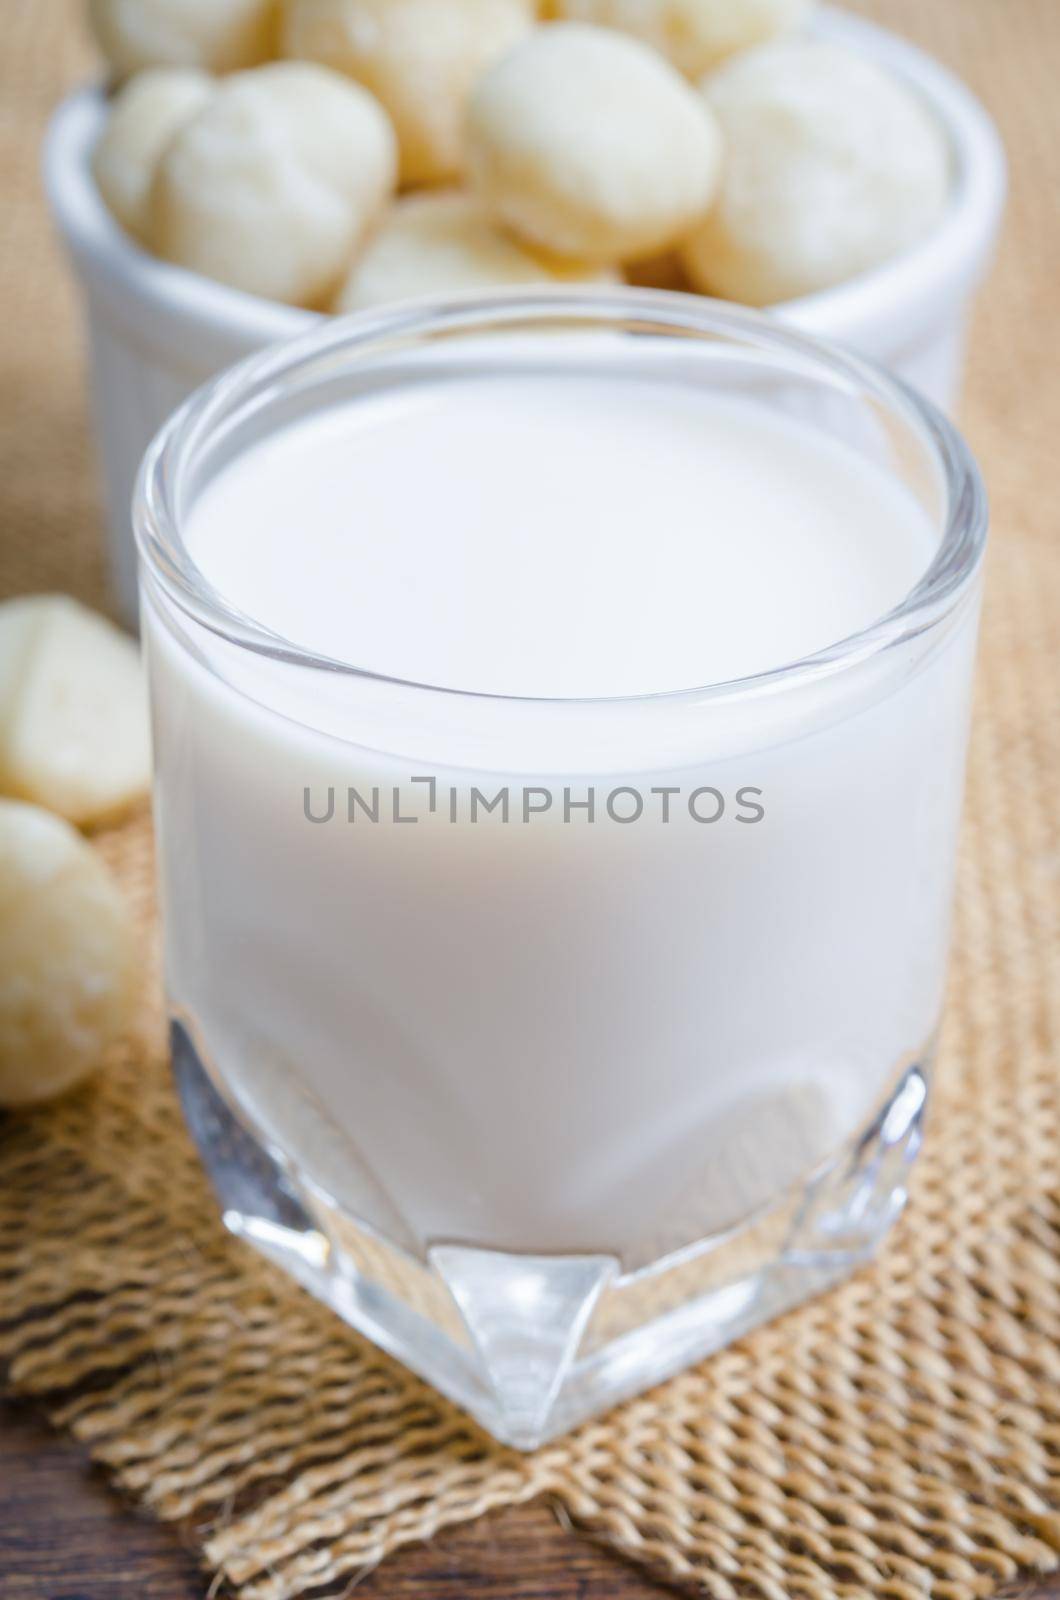 Macadamia milk in a glass and a bowl of macadamia nuts. by Gamjai